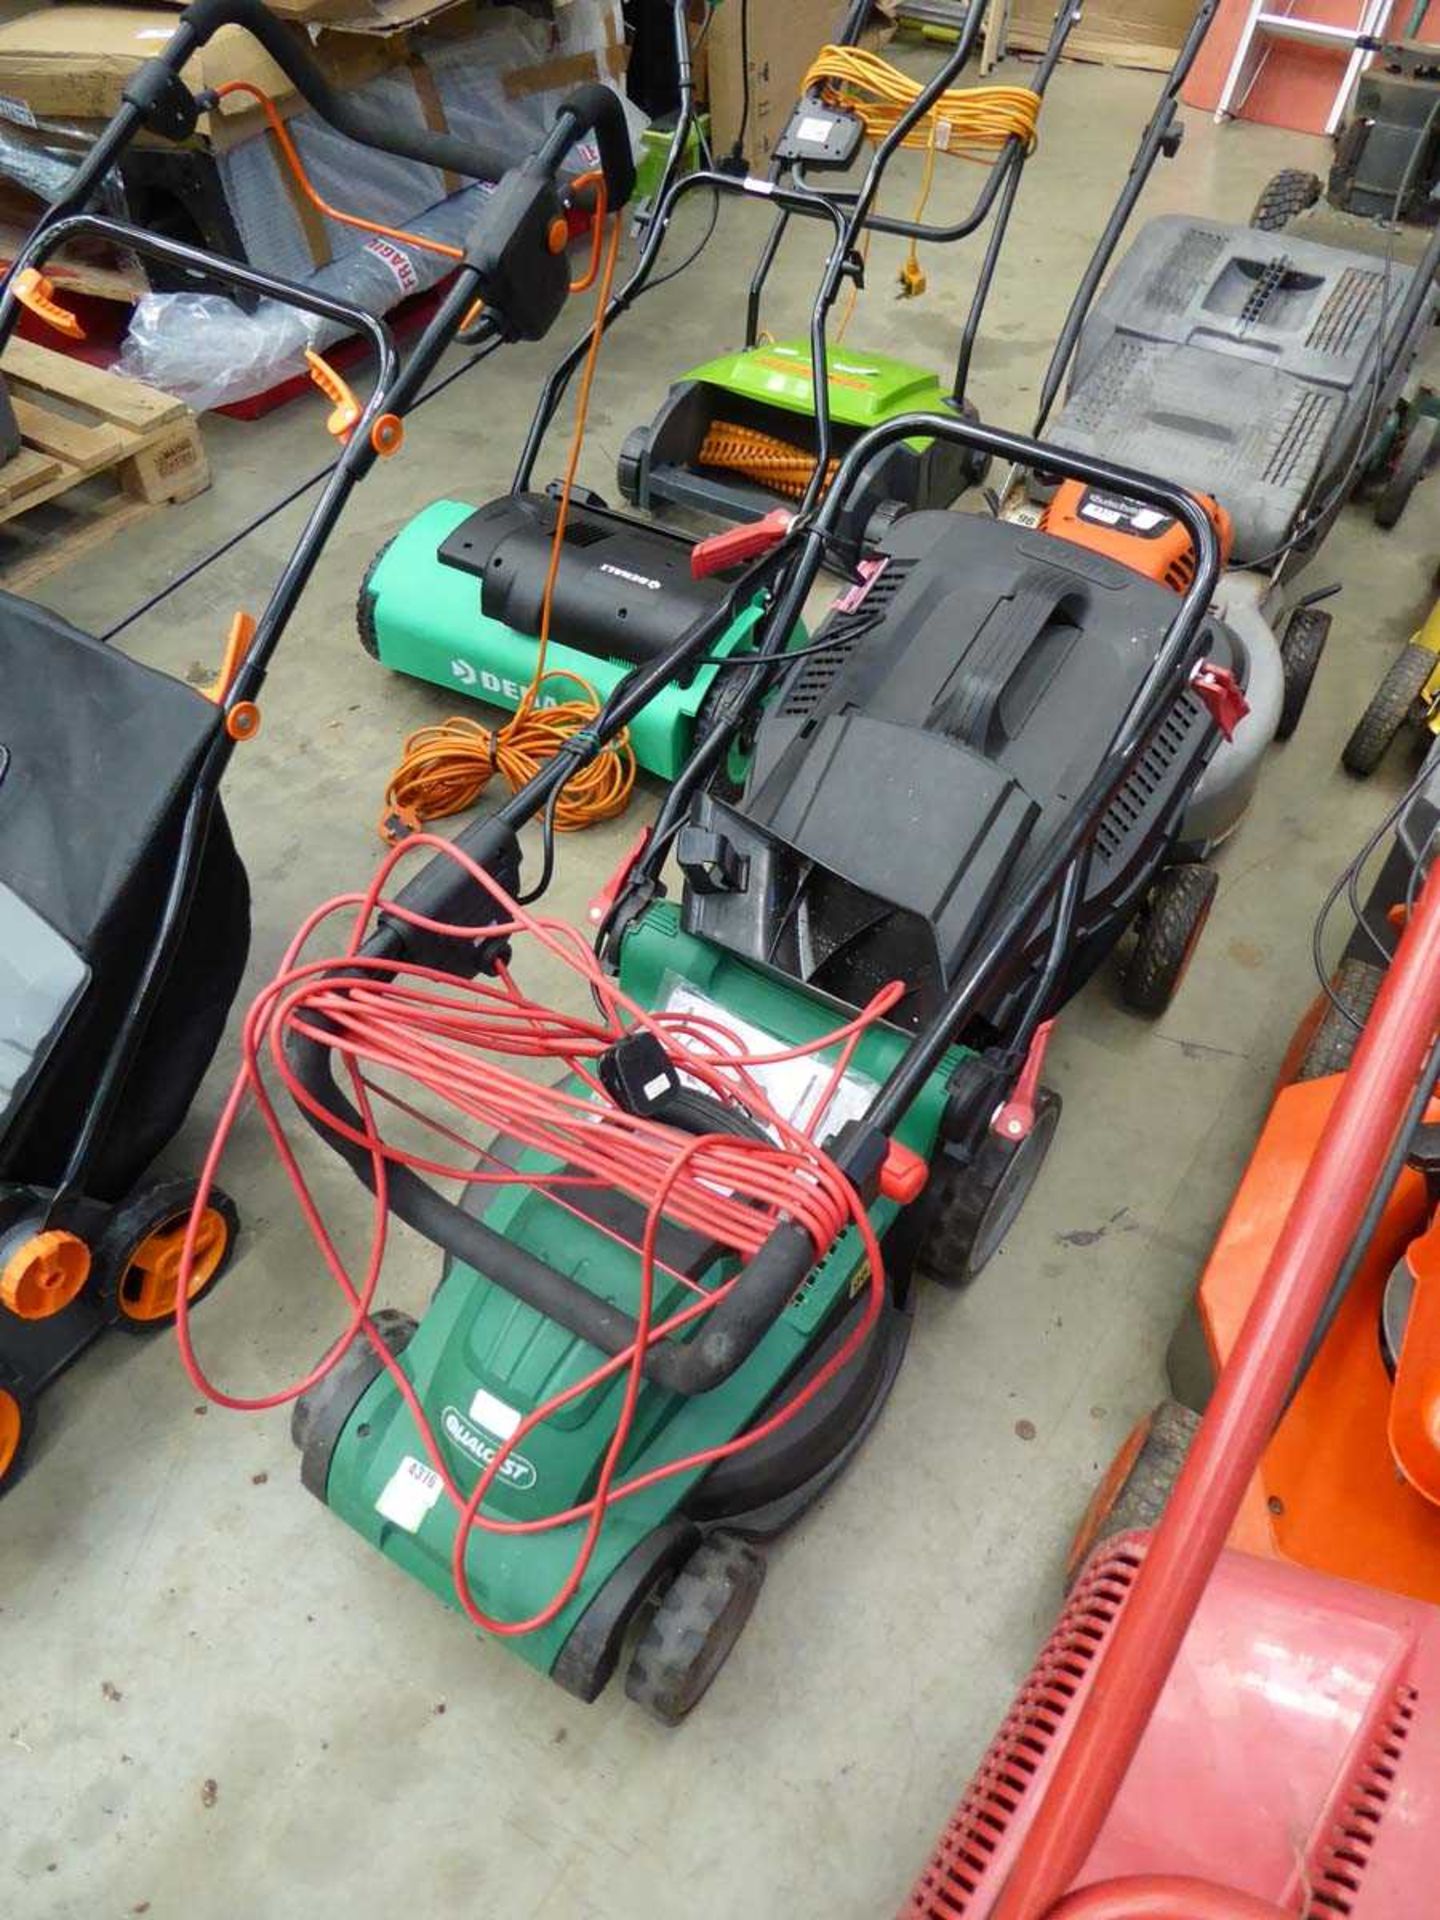 Qualcast electric mower with grass box